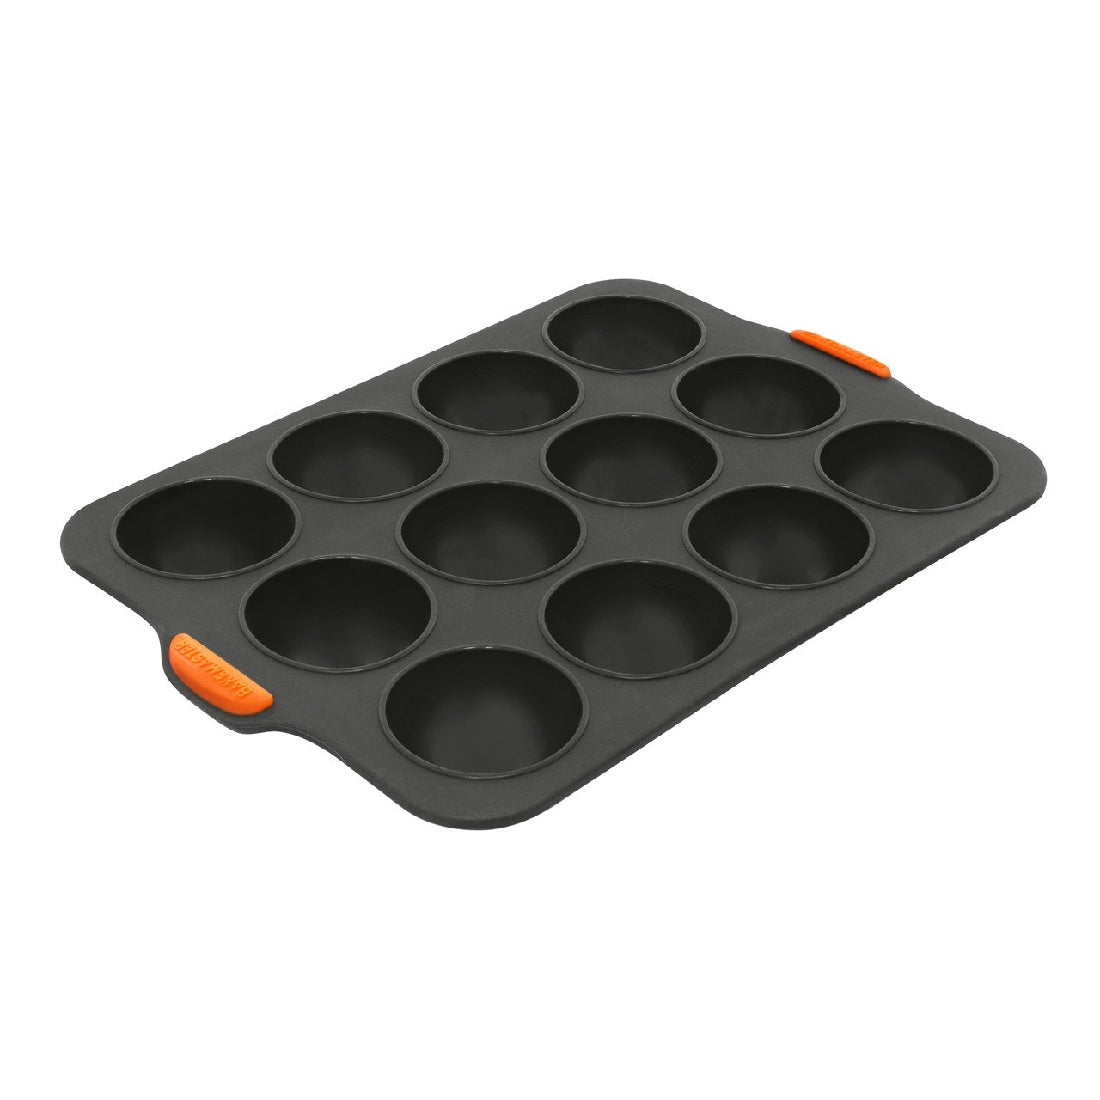 Bakemaster Silicone 12 Cup Dome Tray 35.5x24.5cm